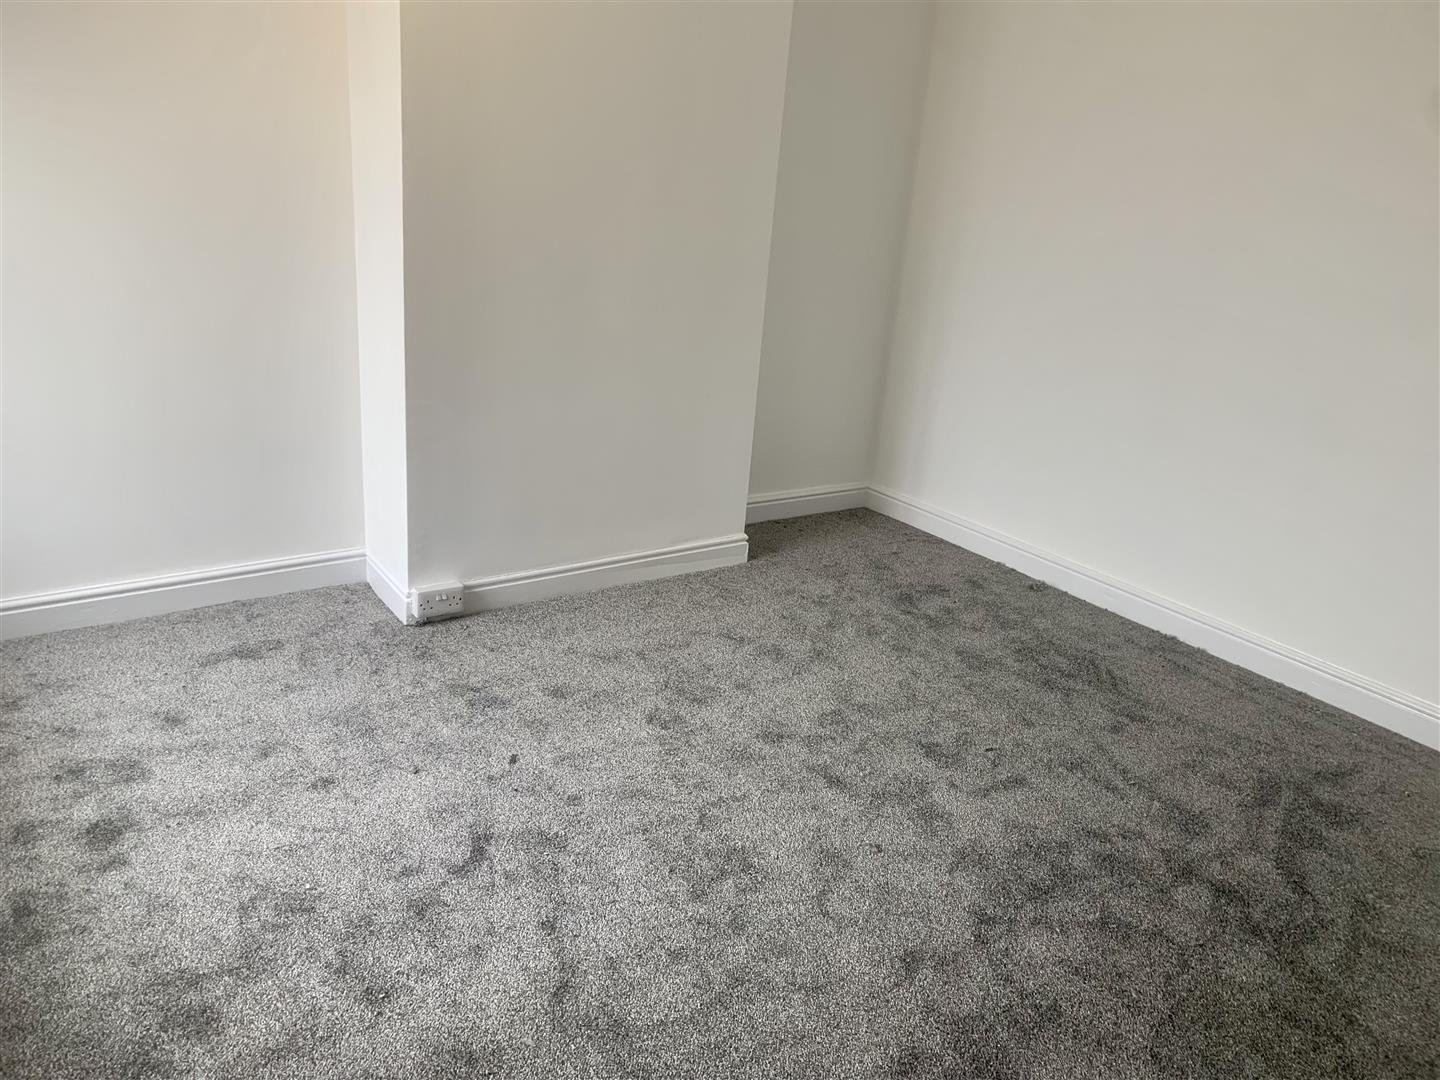 2 bed  to rent in Bolsover  - Property Image 7